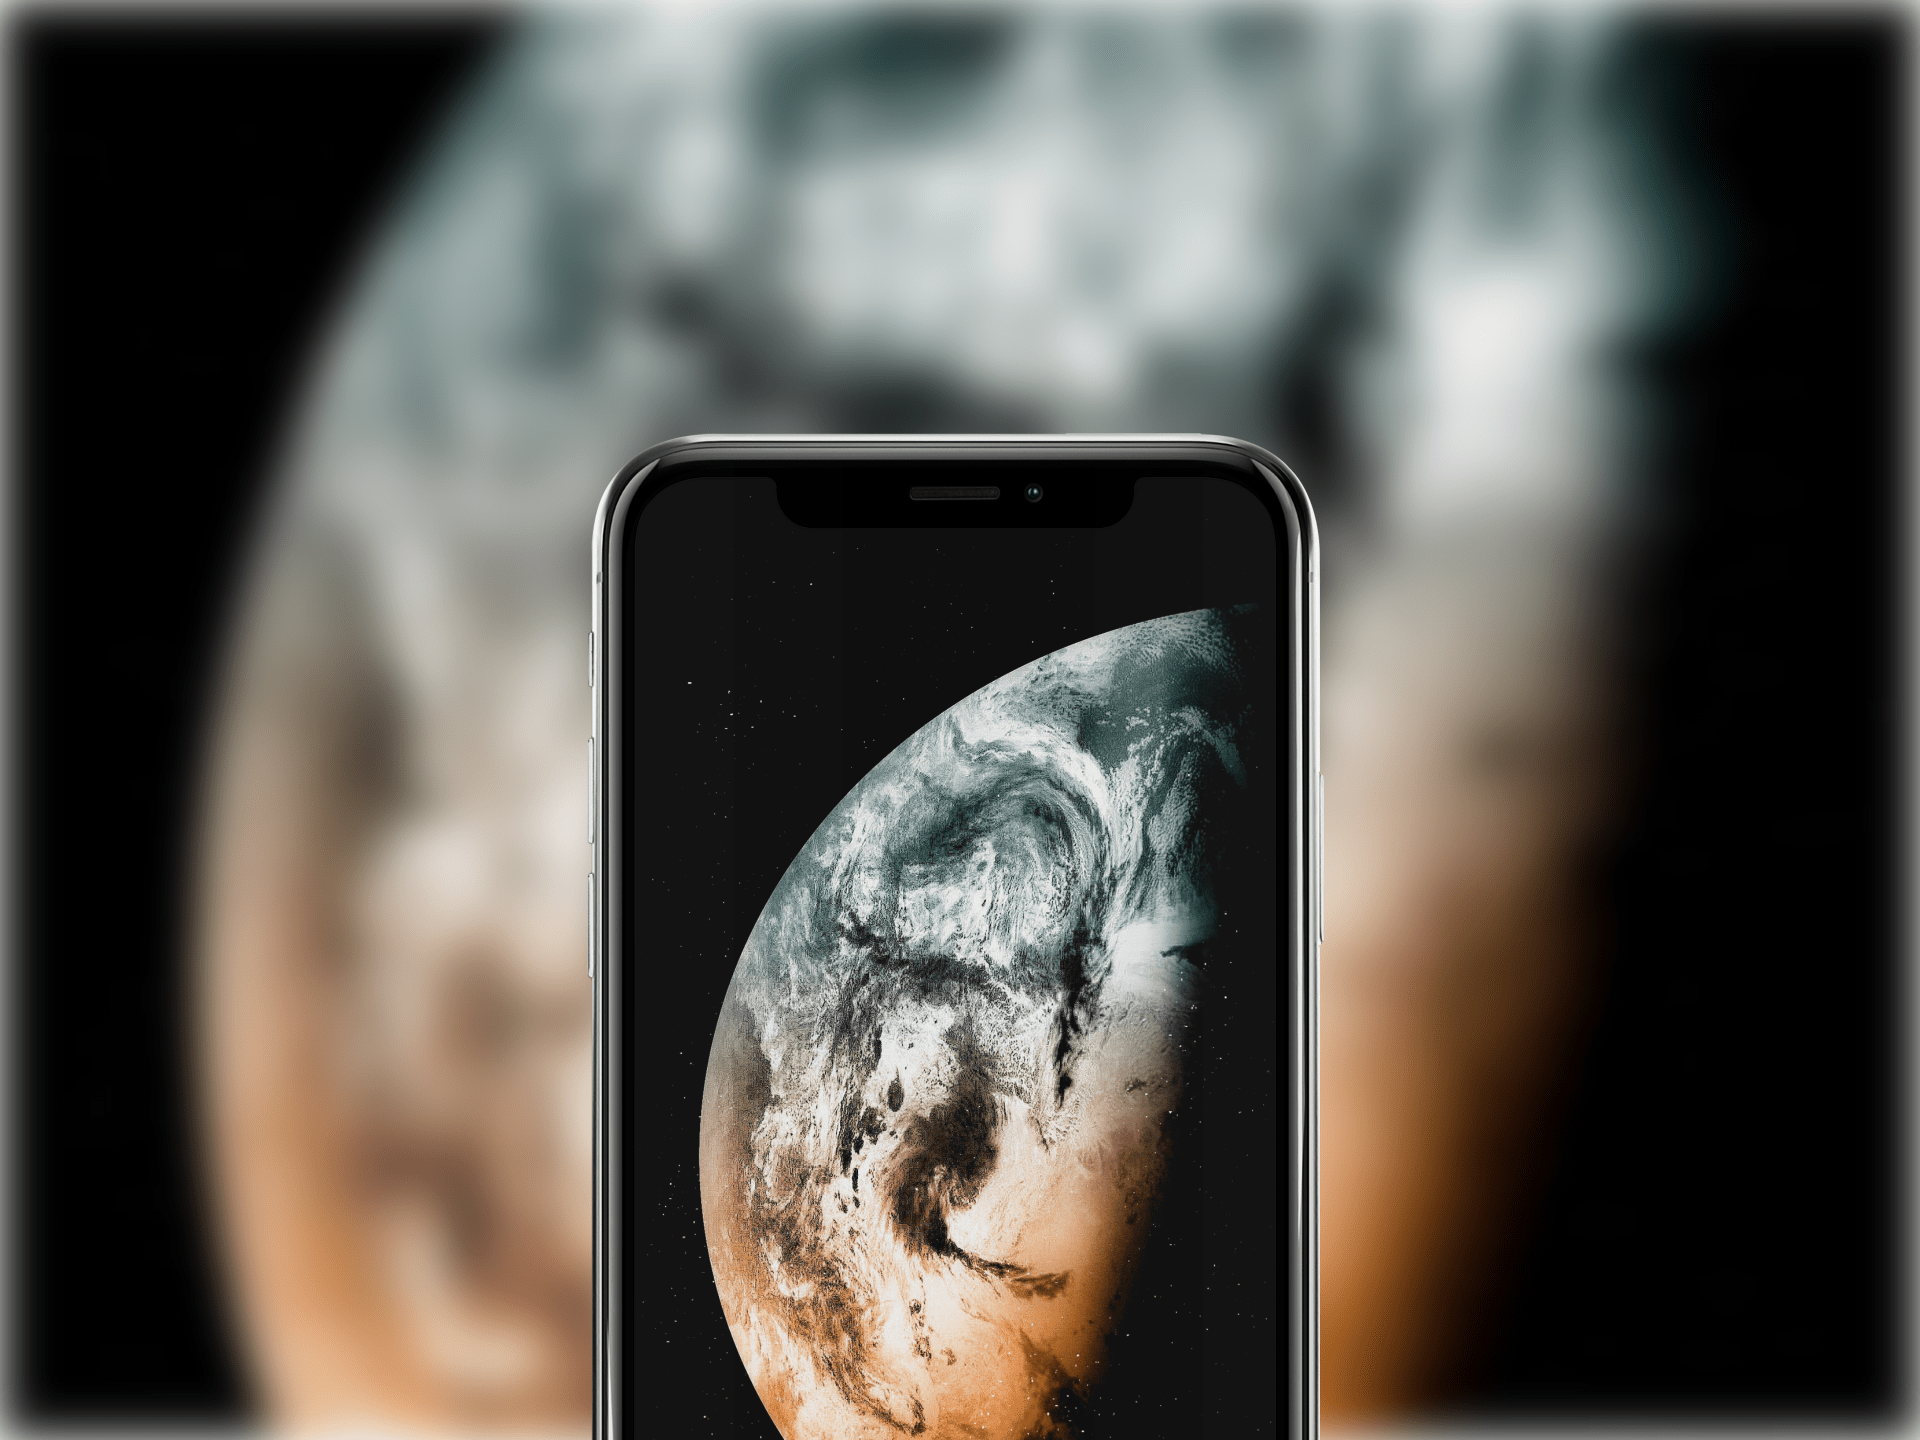 Iphone Space Planets Fantasy - HD Wallpaper 